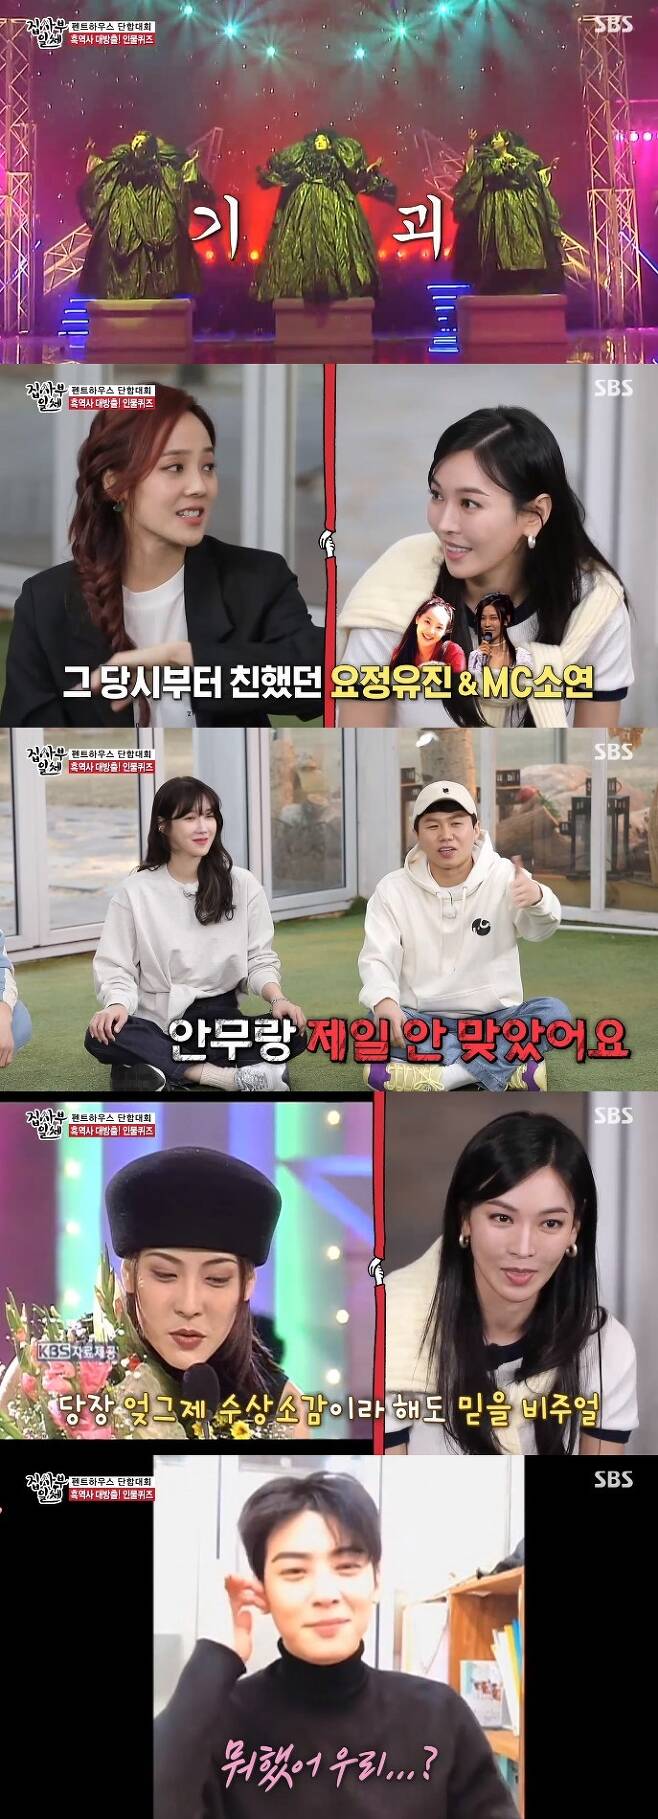 Kim So-yeon, Eugene, Lee Ji-ah and All The Butlers members did not know what to do with the black history release video.On SBS All The Butlers broadcast on February 21, Kim So-yeon, Eugene and Lee Ji-ah, three heroes of Penthouse, appeared.A quiz was presented to meet the problem by watching the video starring the actors.Lee Seung-gi was ashamed to ask, Can I go out for a while when the correct answer comes out?Lee Seung-gi hinted in his own words, I love everything I do, but my family is hard to see.Lee Seung-gi also provided a motion hint and Yang Se-hyeong hit the correct answer, Kikoriki Martin Scorsese.As for Eugene, video was given at the time of S.E.S. activities; all imagined fairy-like visuals, but S.E.S. surprised everyone with its unconventional styling reminiscent of magic shows.Kim So-yeon was hit by the correct answer Running and showed a popular MC at the time.Yang Se-hyeong laughed, saying, It is the worst song with singing and choreography.Then came a scene of the drama All About Eve, starring Kim So-yeon, the answer being an ambassador accusing Chae Rim of she put acetone in my cosmetics.Kim So-yeon explained that he had training with new announcers to play the role of announcer at the time.Also for Action Shin, I was injured in an ambulance and had 12 stitches on my leg, I went to the gym that day, he surprised everyone.Another Kim So-yeon video was released in 1995 at the time of KBS acting.Kim So-yeon raised his curiosity by saying that he was controversial because he received a sub-phase at the time.Kim So-yeon in video boasted a unique presence with a big height, and Kim So-yeon said, It was about 3cm smaller than now.The quilt kick video peak was taken by Jung Eun-woo, who replied to the fans message, saying, I dreamed? What did we do?, which sent everyone appalling.Lee Seung-gi teased the shameful tea Jung Eun-woo, saying, It was like Kikoriki Martin Scorsese.The surprise black history video of the three actresses and All The Butlers members painted the house theater with laughter.